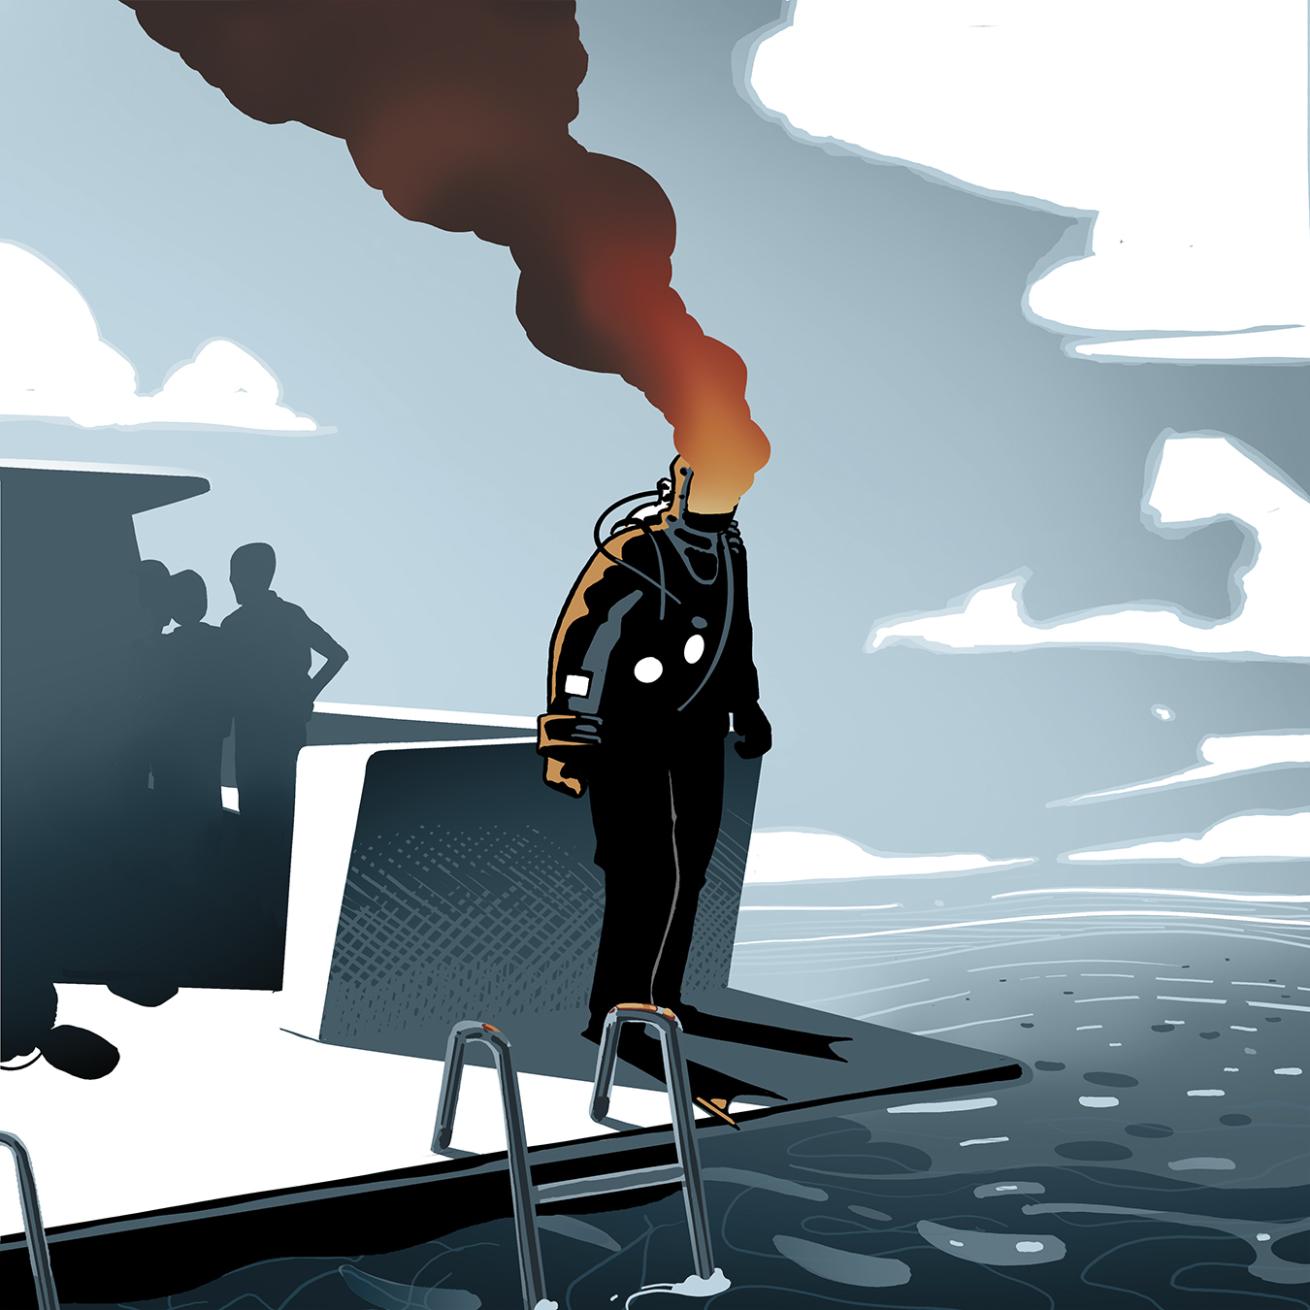 an illustration of a diver at the edge of the boat overheating